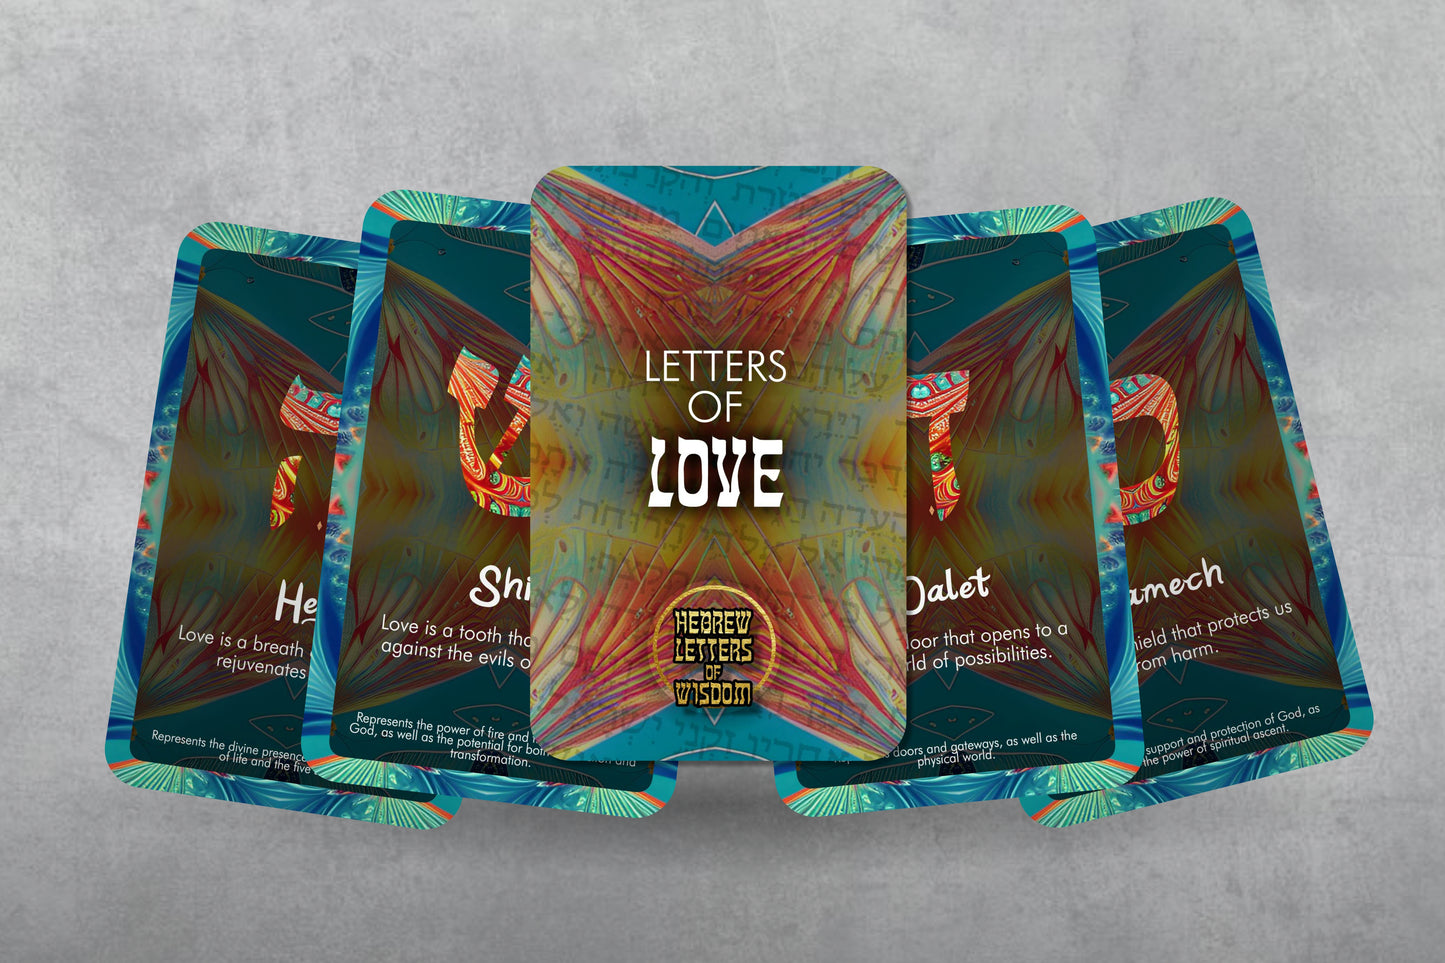 Letters of Love - Hebrew Letters of Wisdom